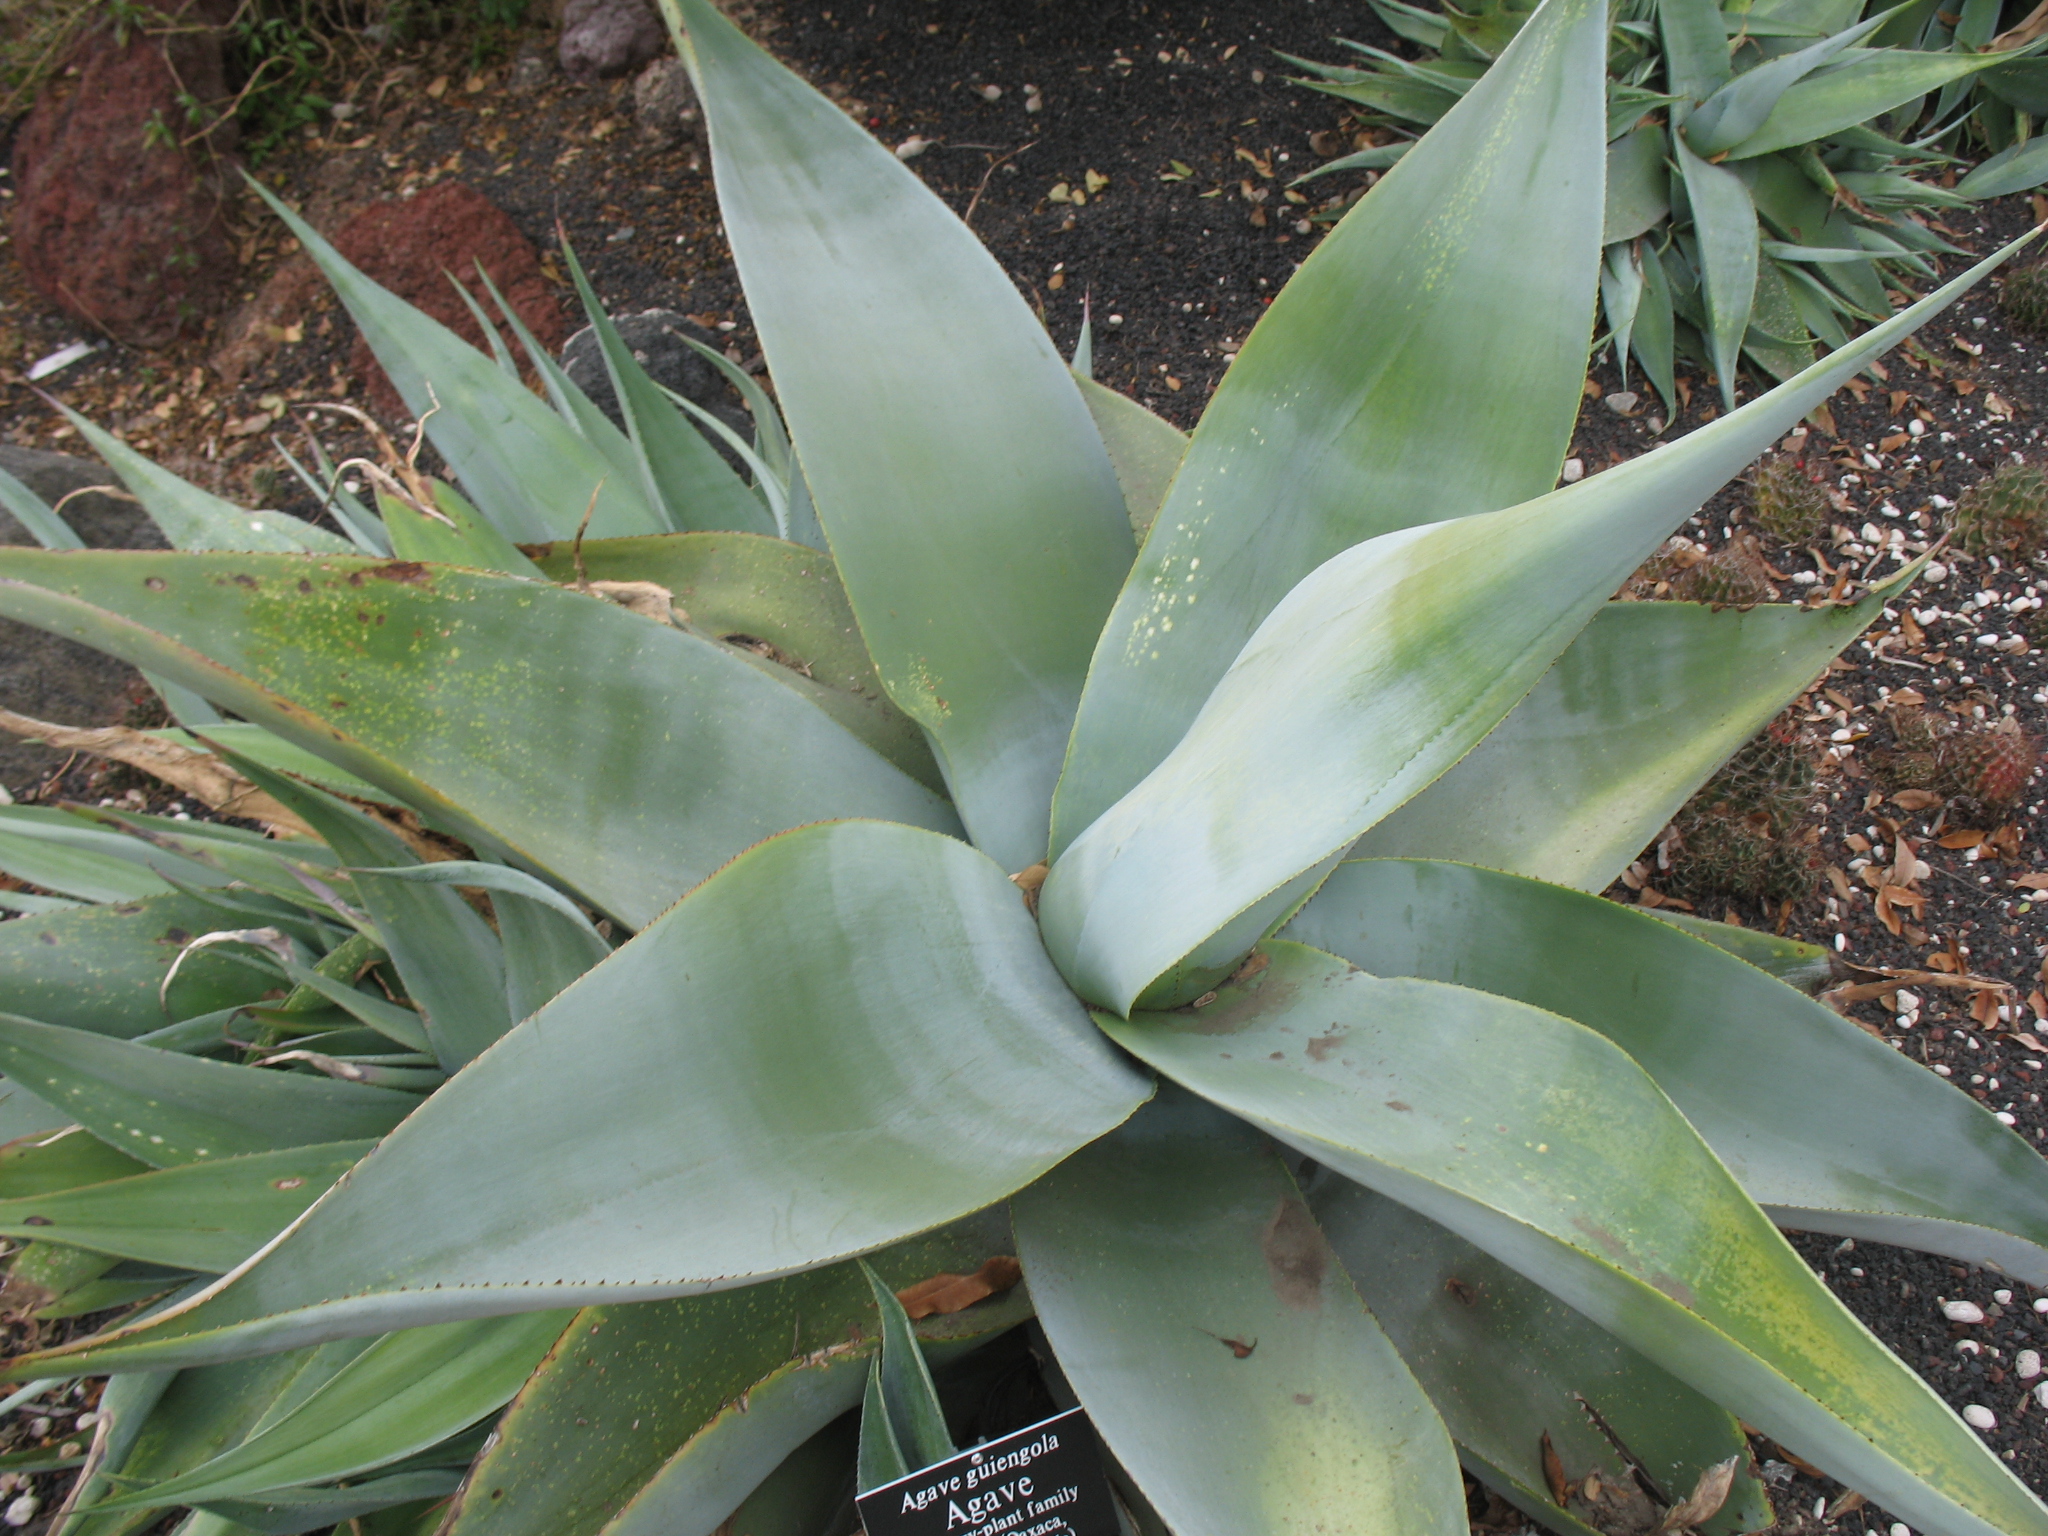 Agave guiengola / Agave, Quiengola Agave